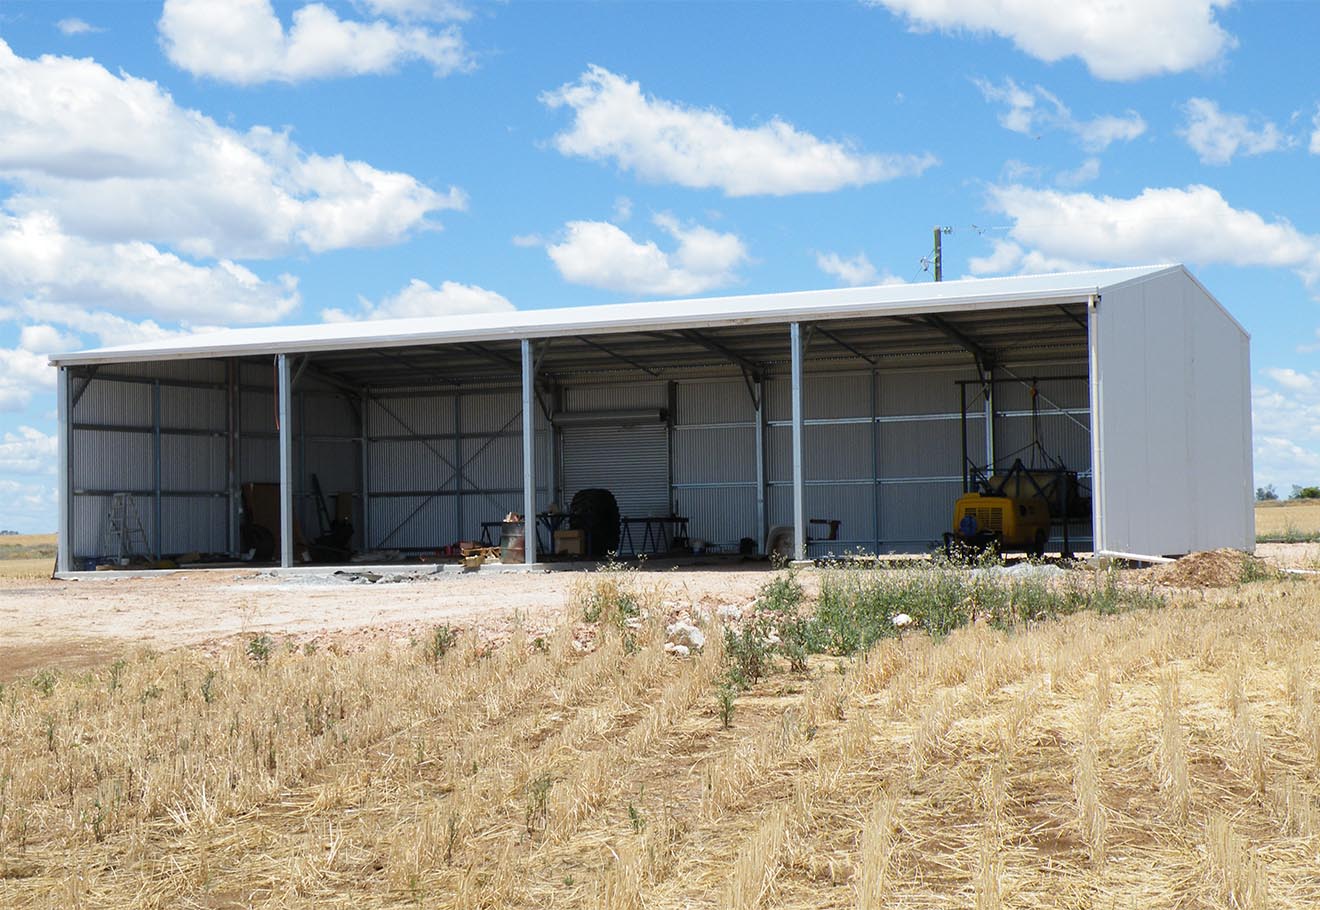 Rural gable-roof shed for storing machinery